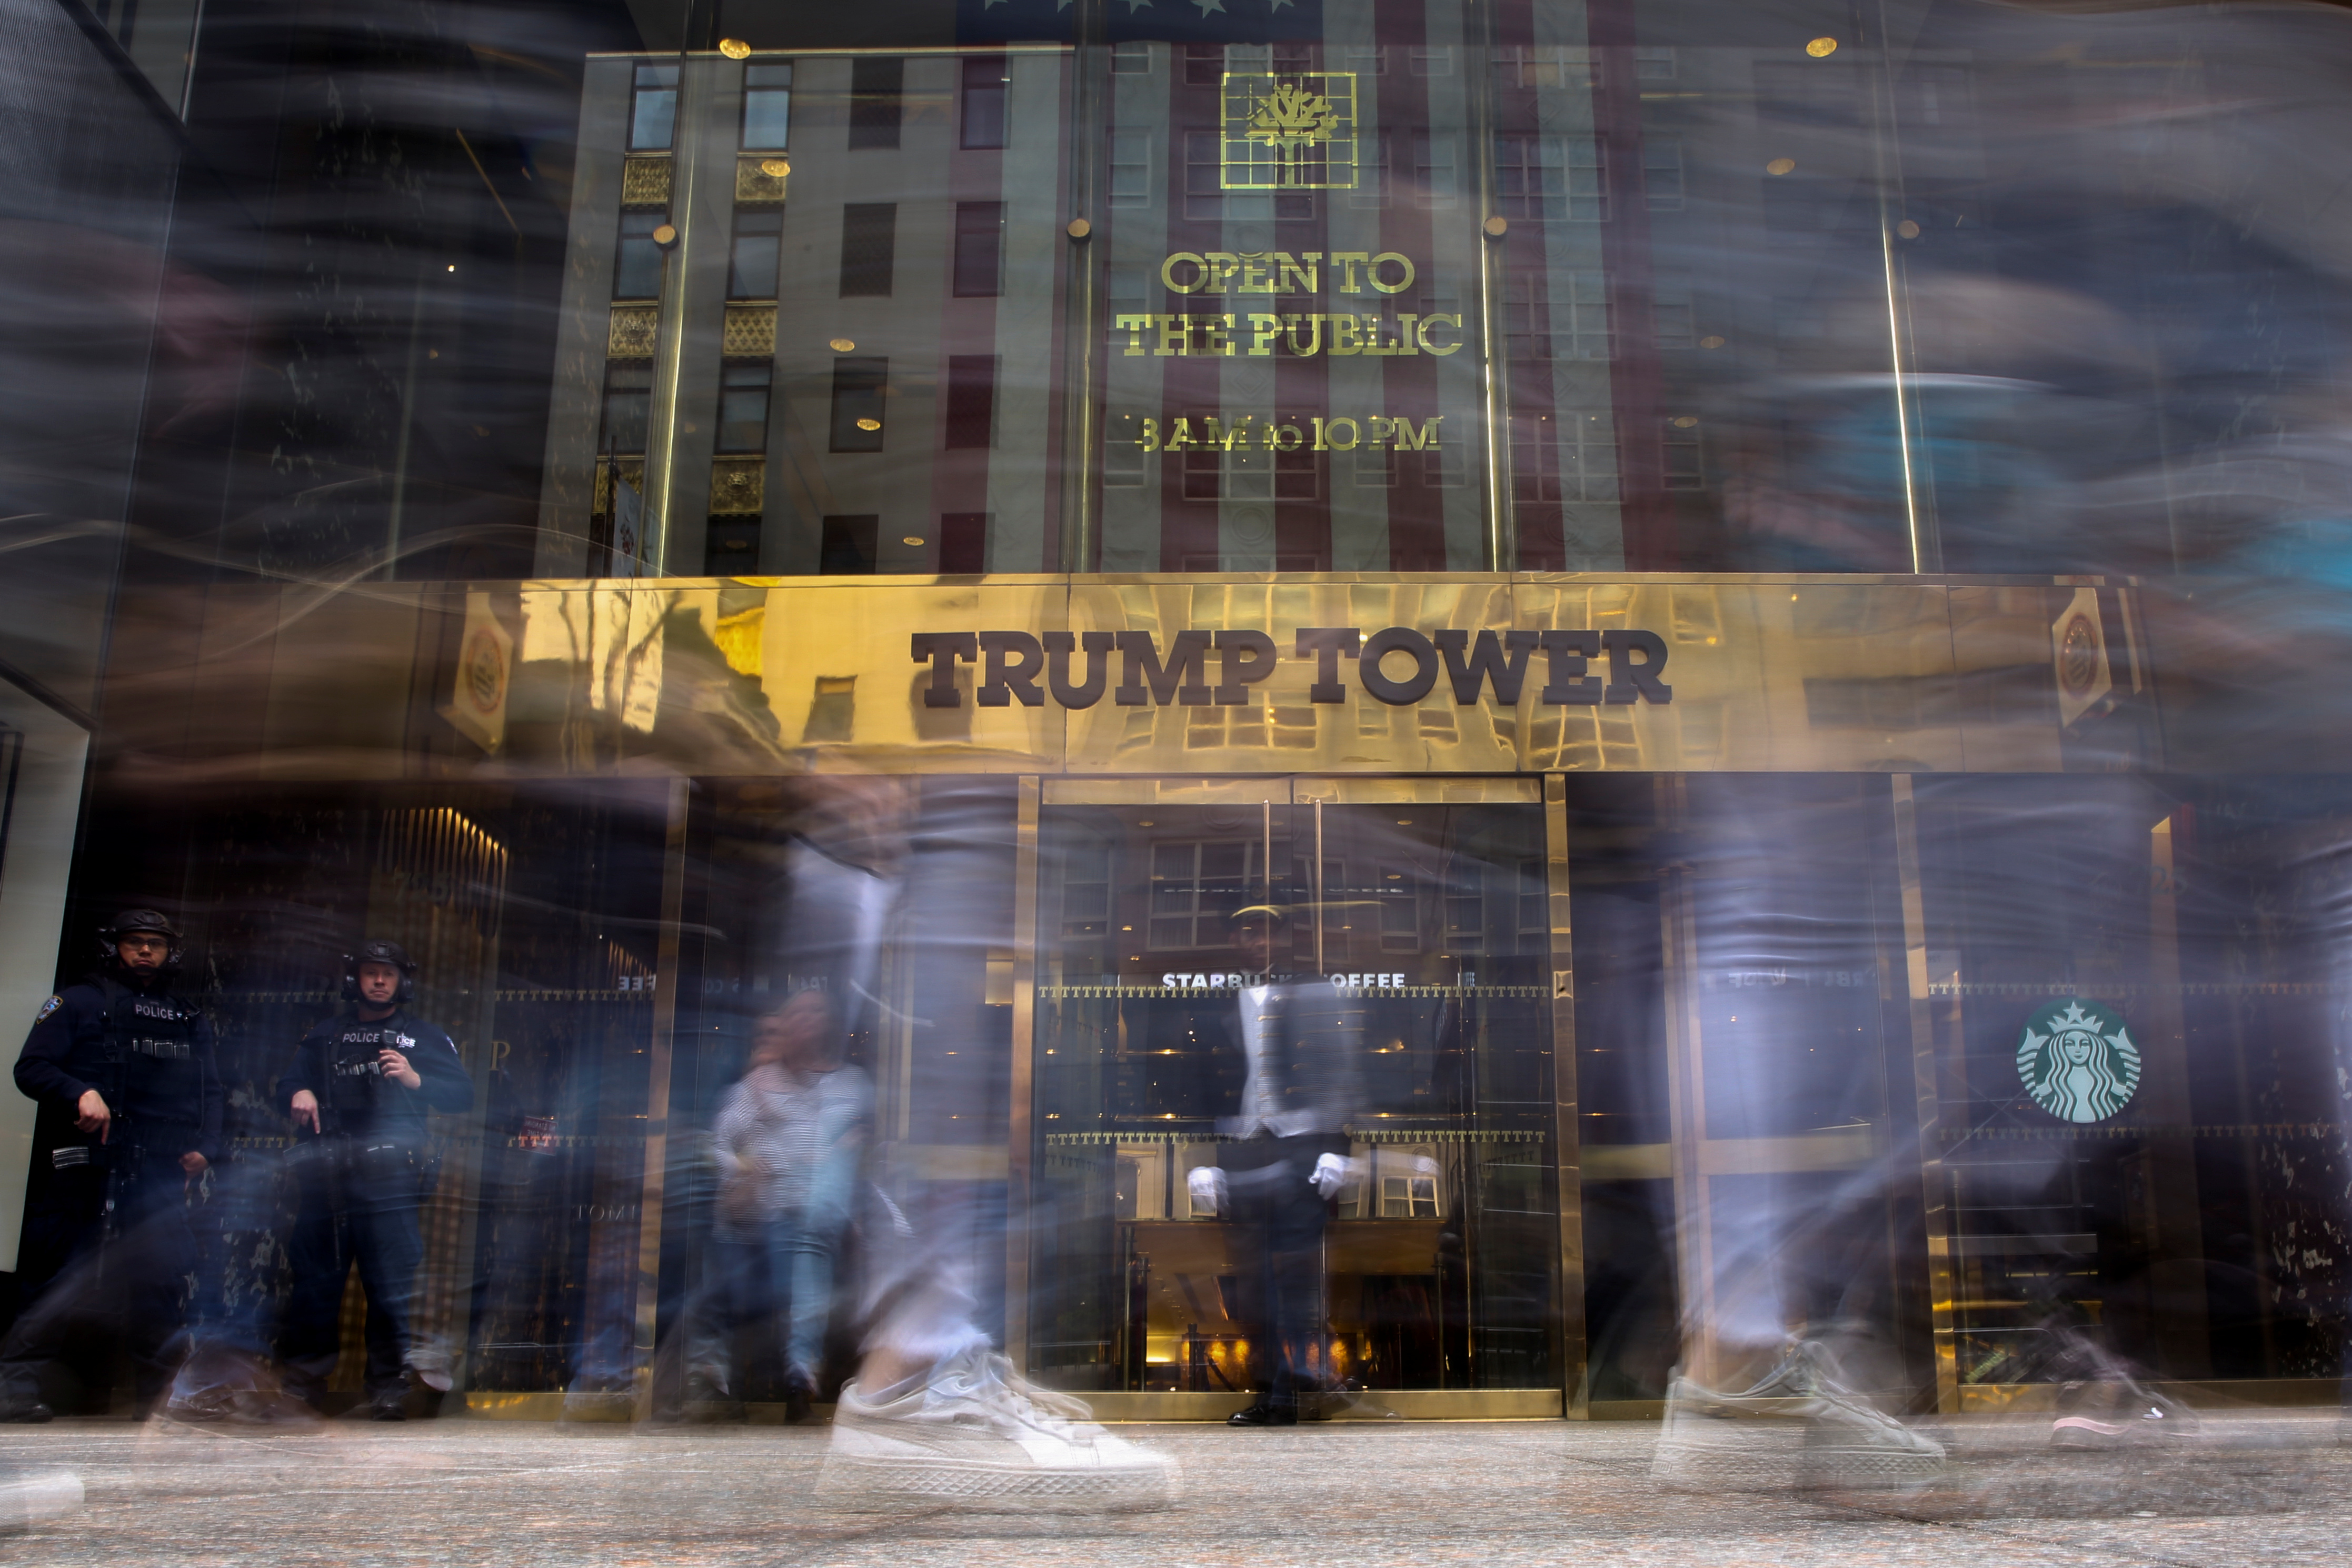 Pedestrians walk past and take pictures in front of the Trump Tower on 5th Avenue in the Manhattan borough of New York City, New York, U.S., April 18, 2019. REUTERS/Caitlin Ochs